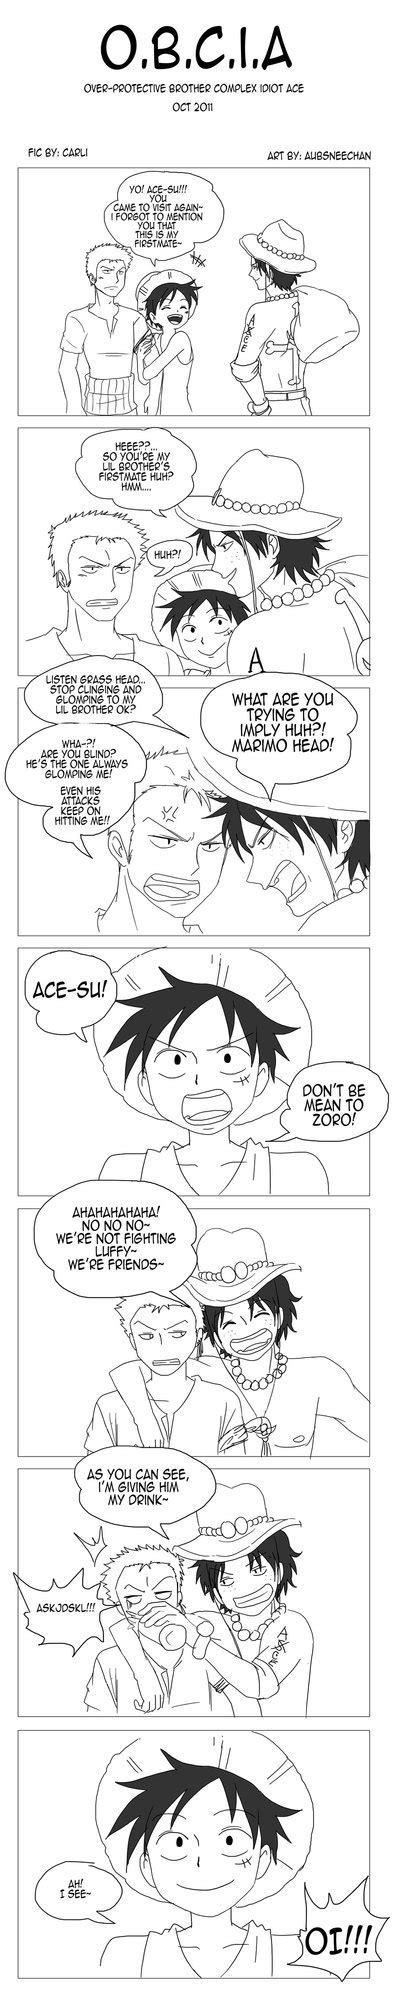 Overprotective Brother Pt1 One Piece Comic One Piece Meme One Piece Anime